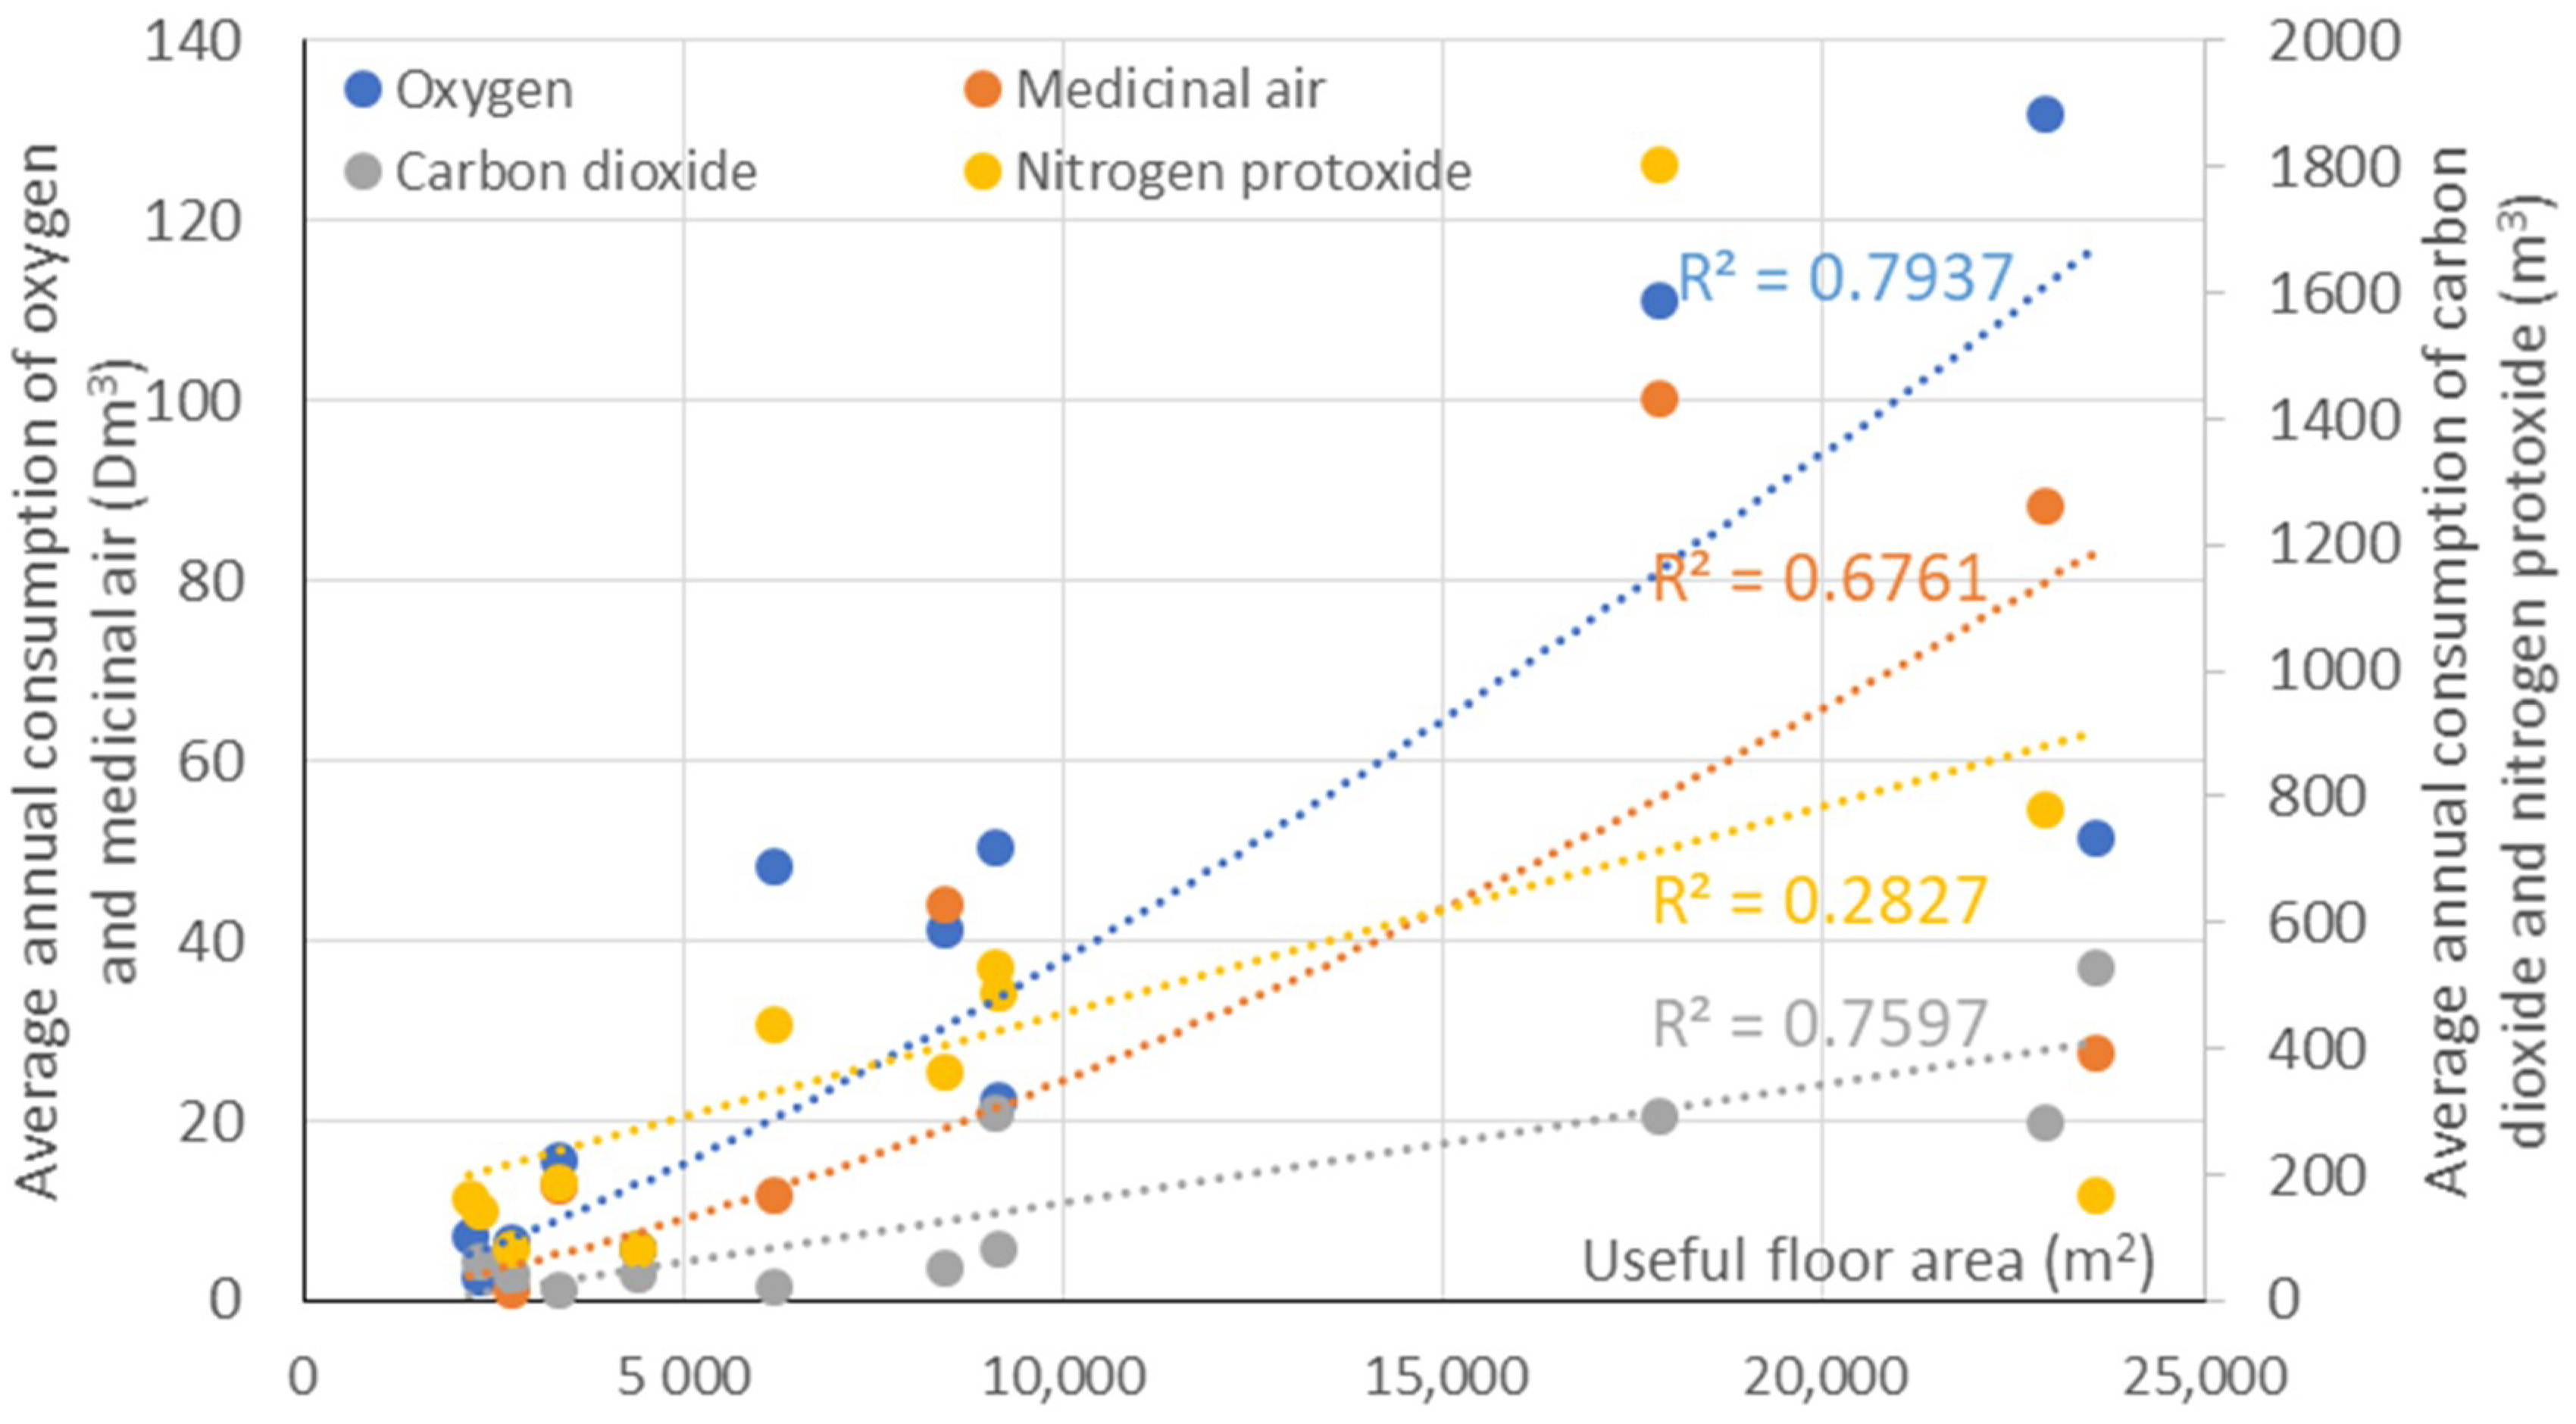 medical gas research impact factor